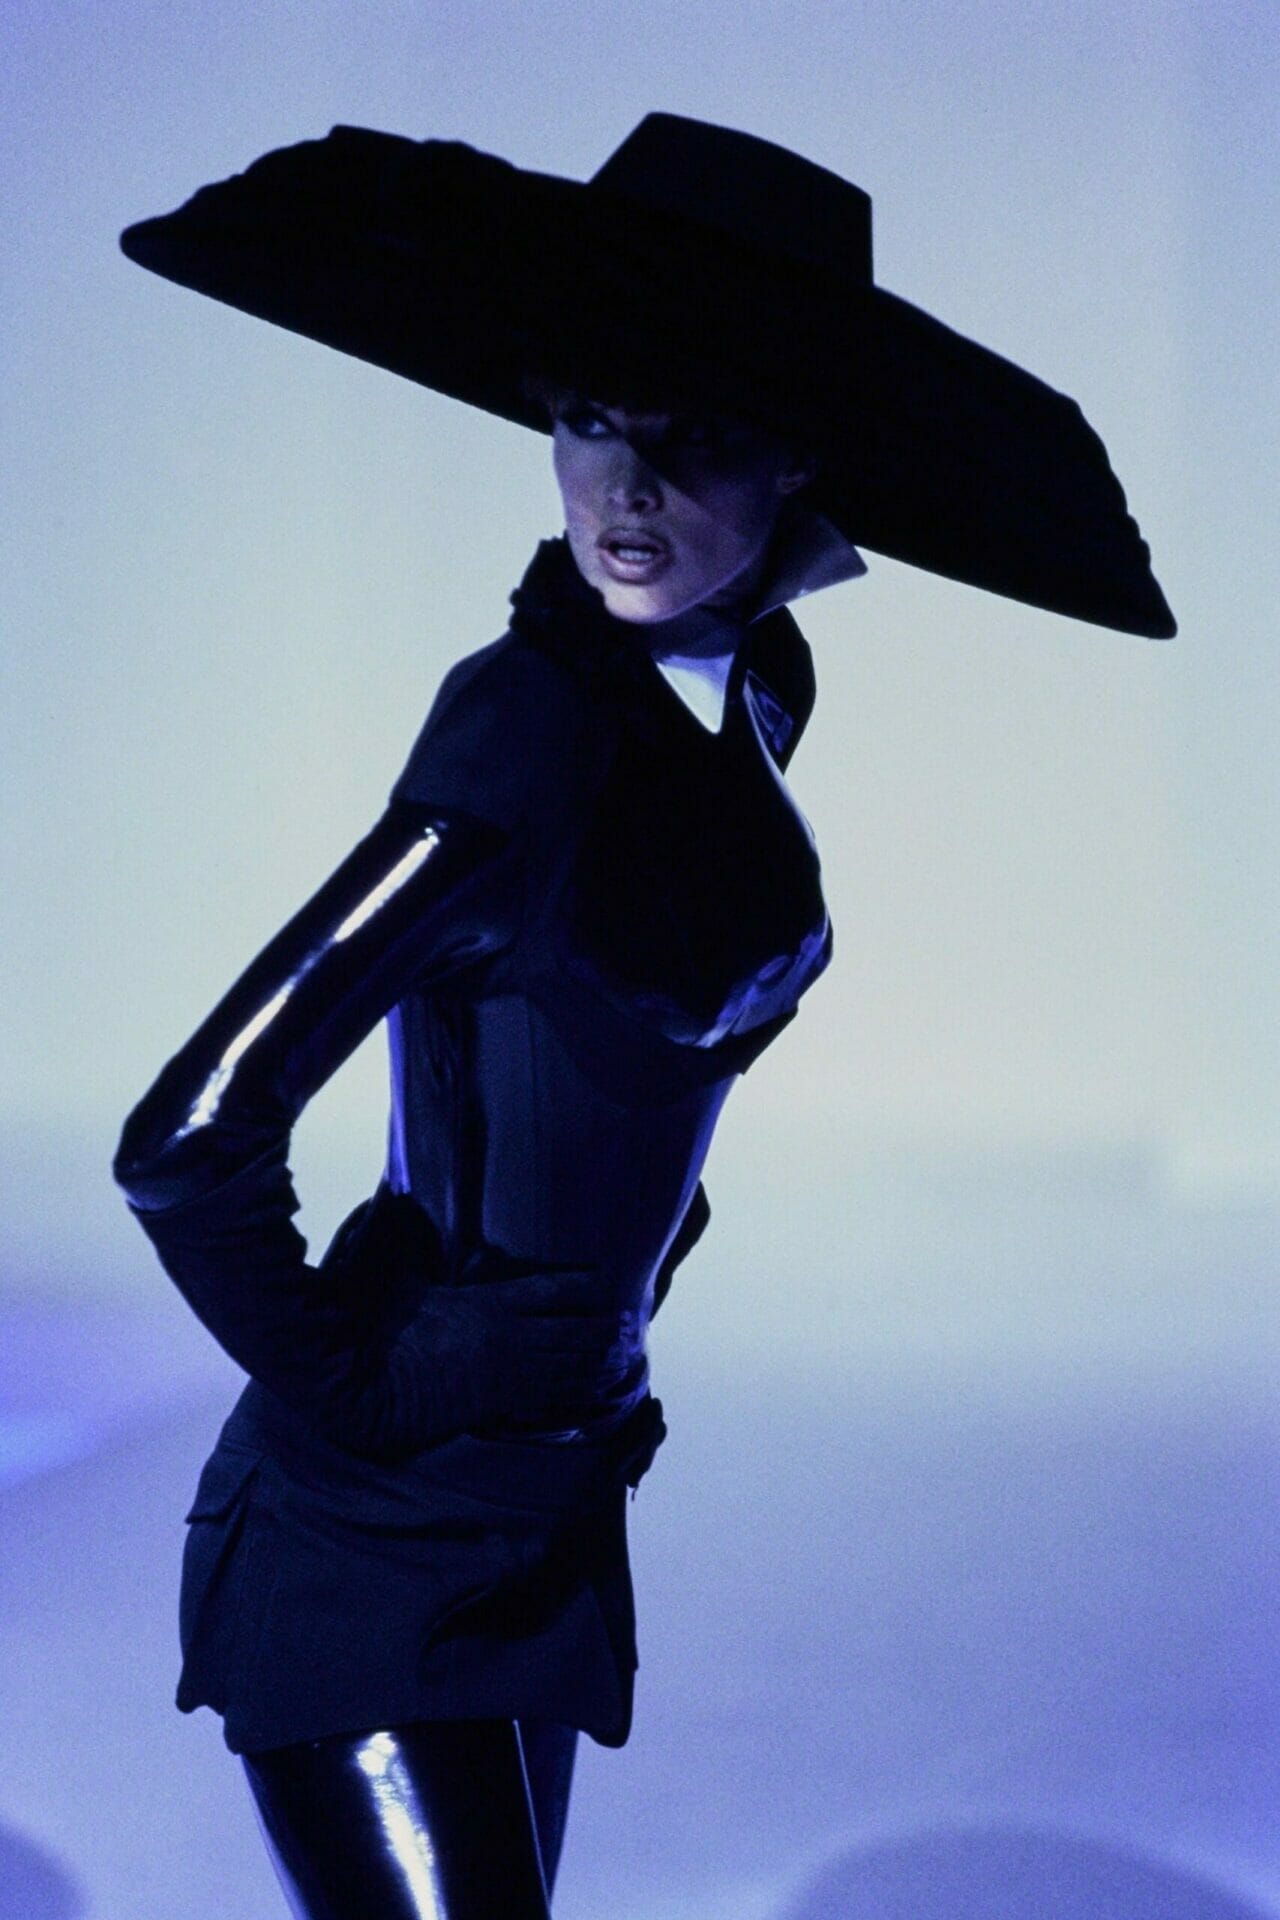 THIERRY MUGLER READY-TO-WEAR FALL-WINTER 1995-1996. RUNWAY MAGAZINE ® Collections Special Selection "Fashion Treasure".